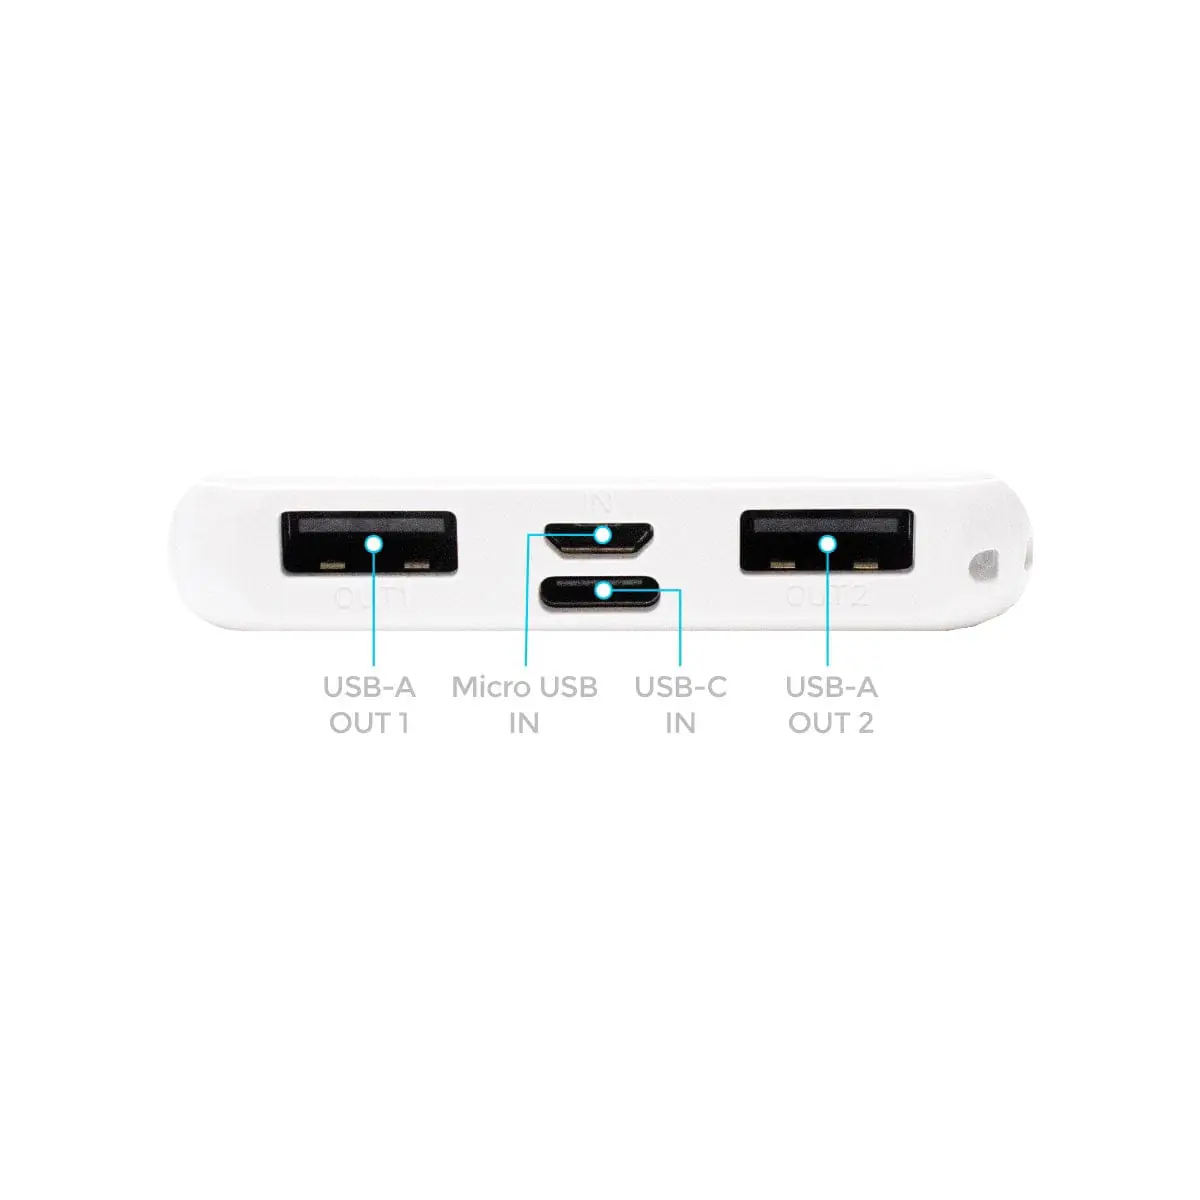 5000mAh Power Bank 10W, Portable Charger, White, Bottom View, Displaying Charging Ports - Micro USB, USB-C, and 2 USB-A.